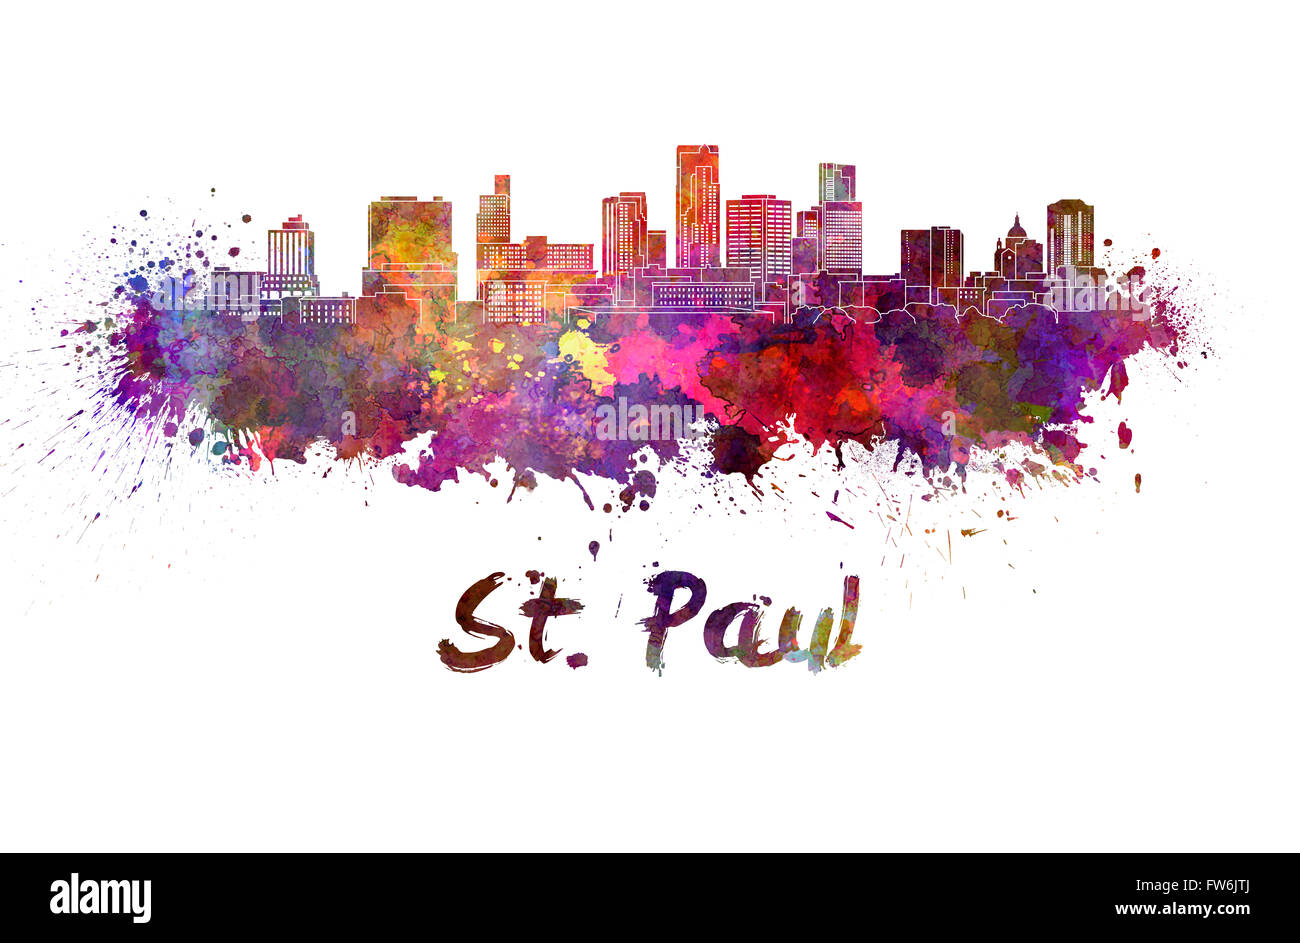 Saint Paul skyline in watercolor splatters with clipping path Stock Photo